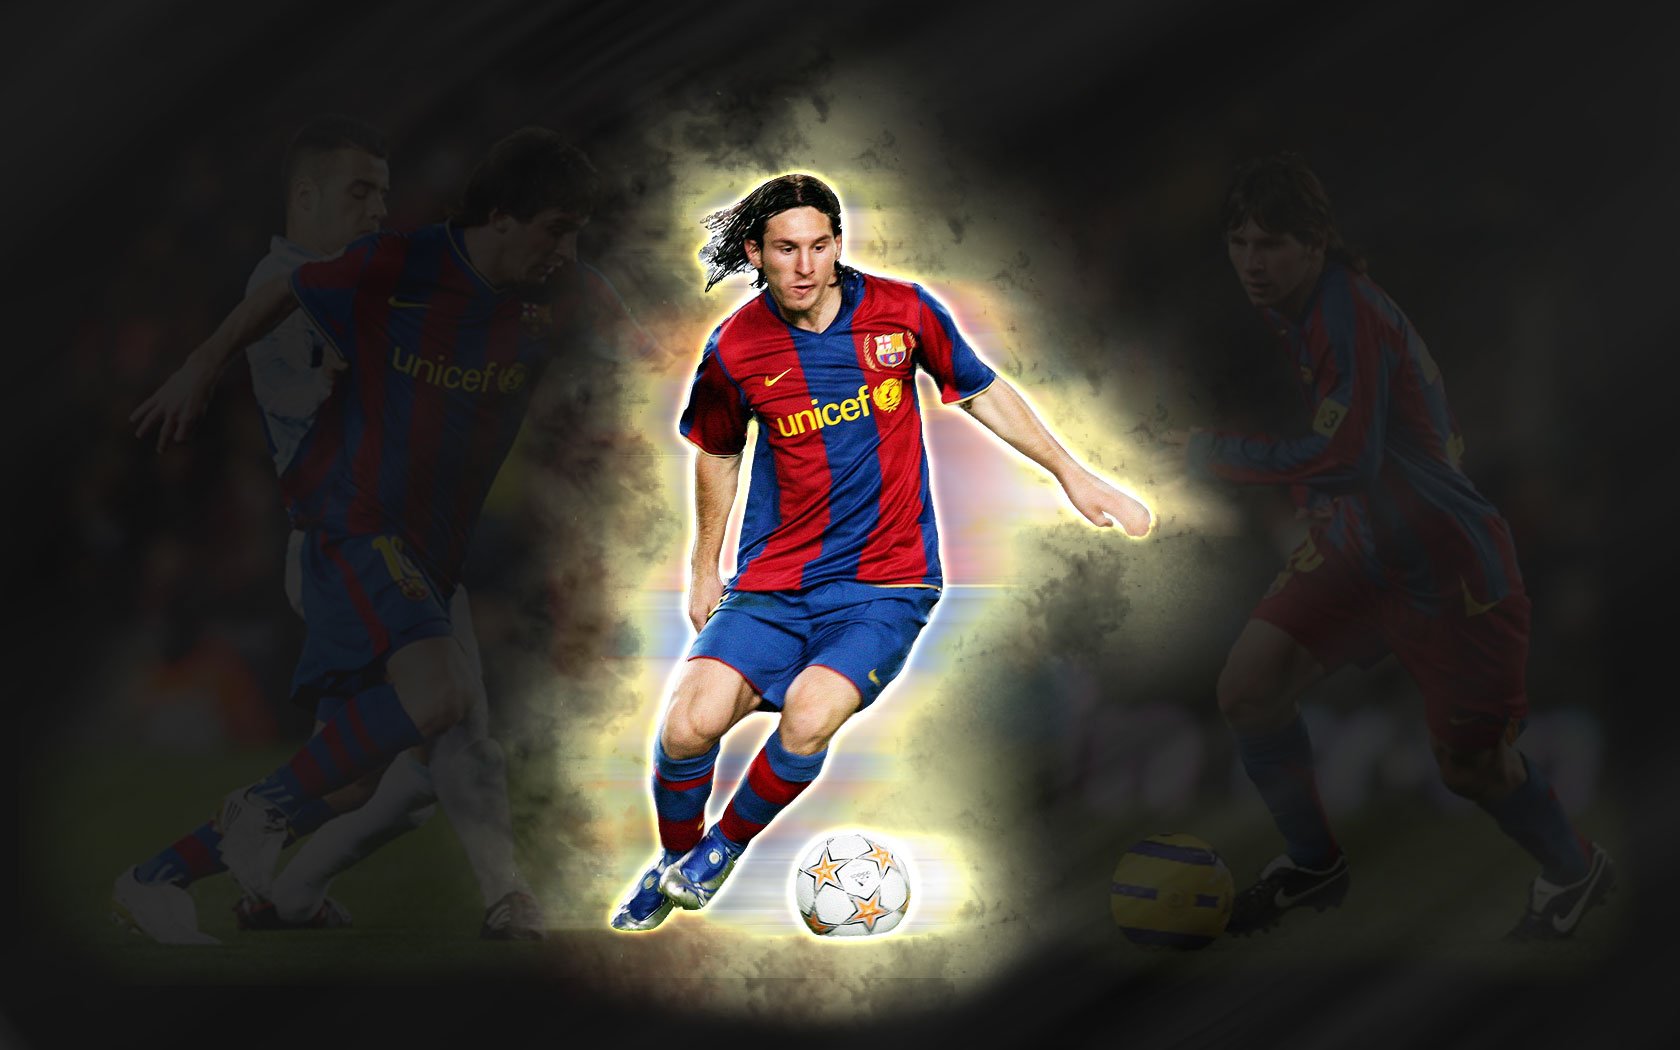 Lionel Messi Wallpaper 10 10255 Hd Wallpapers in Football   Imagesci